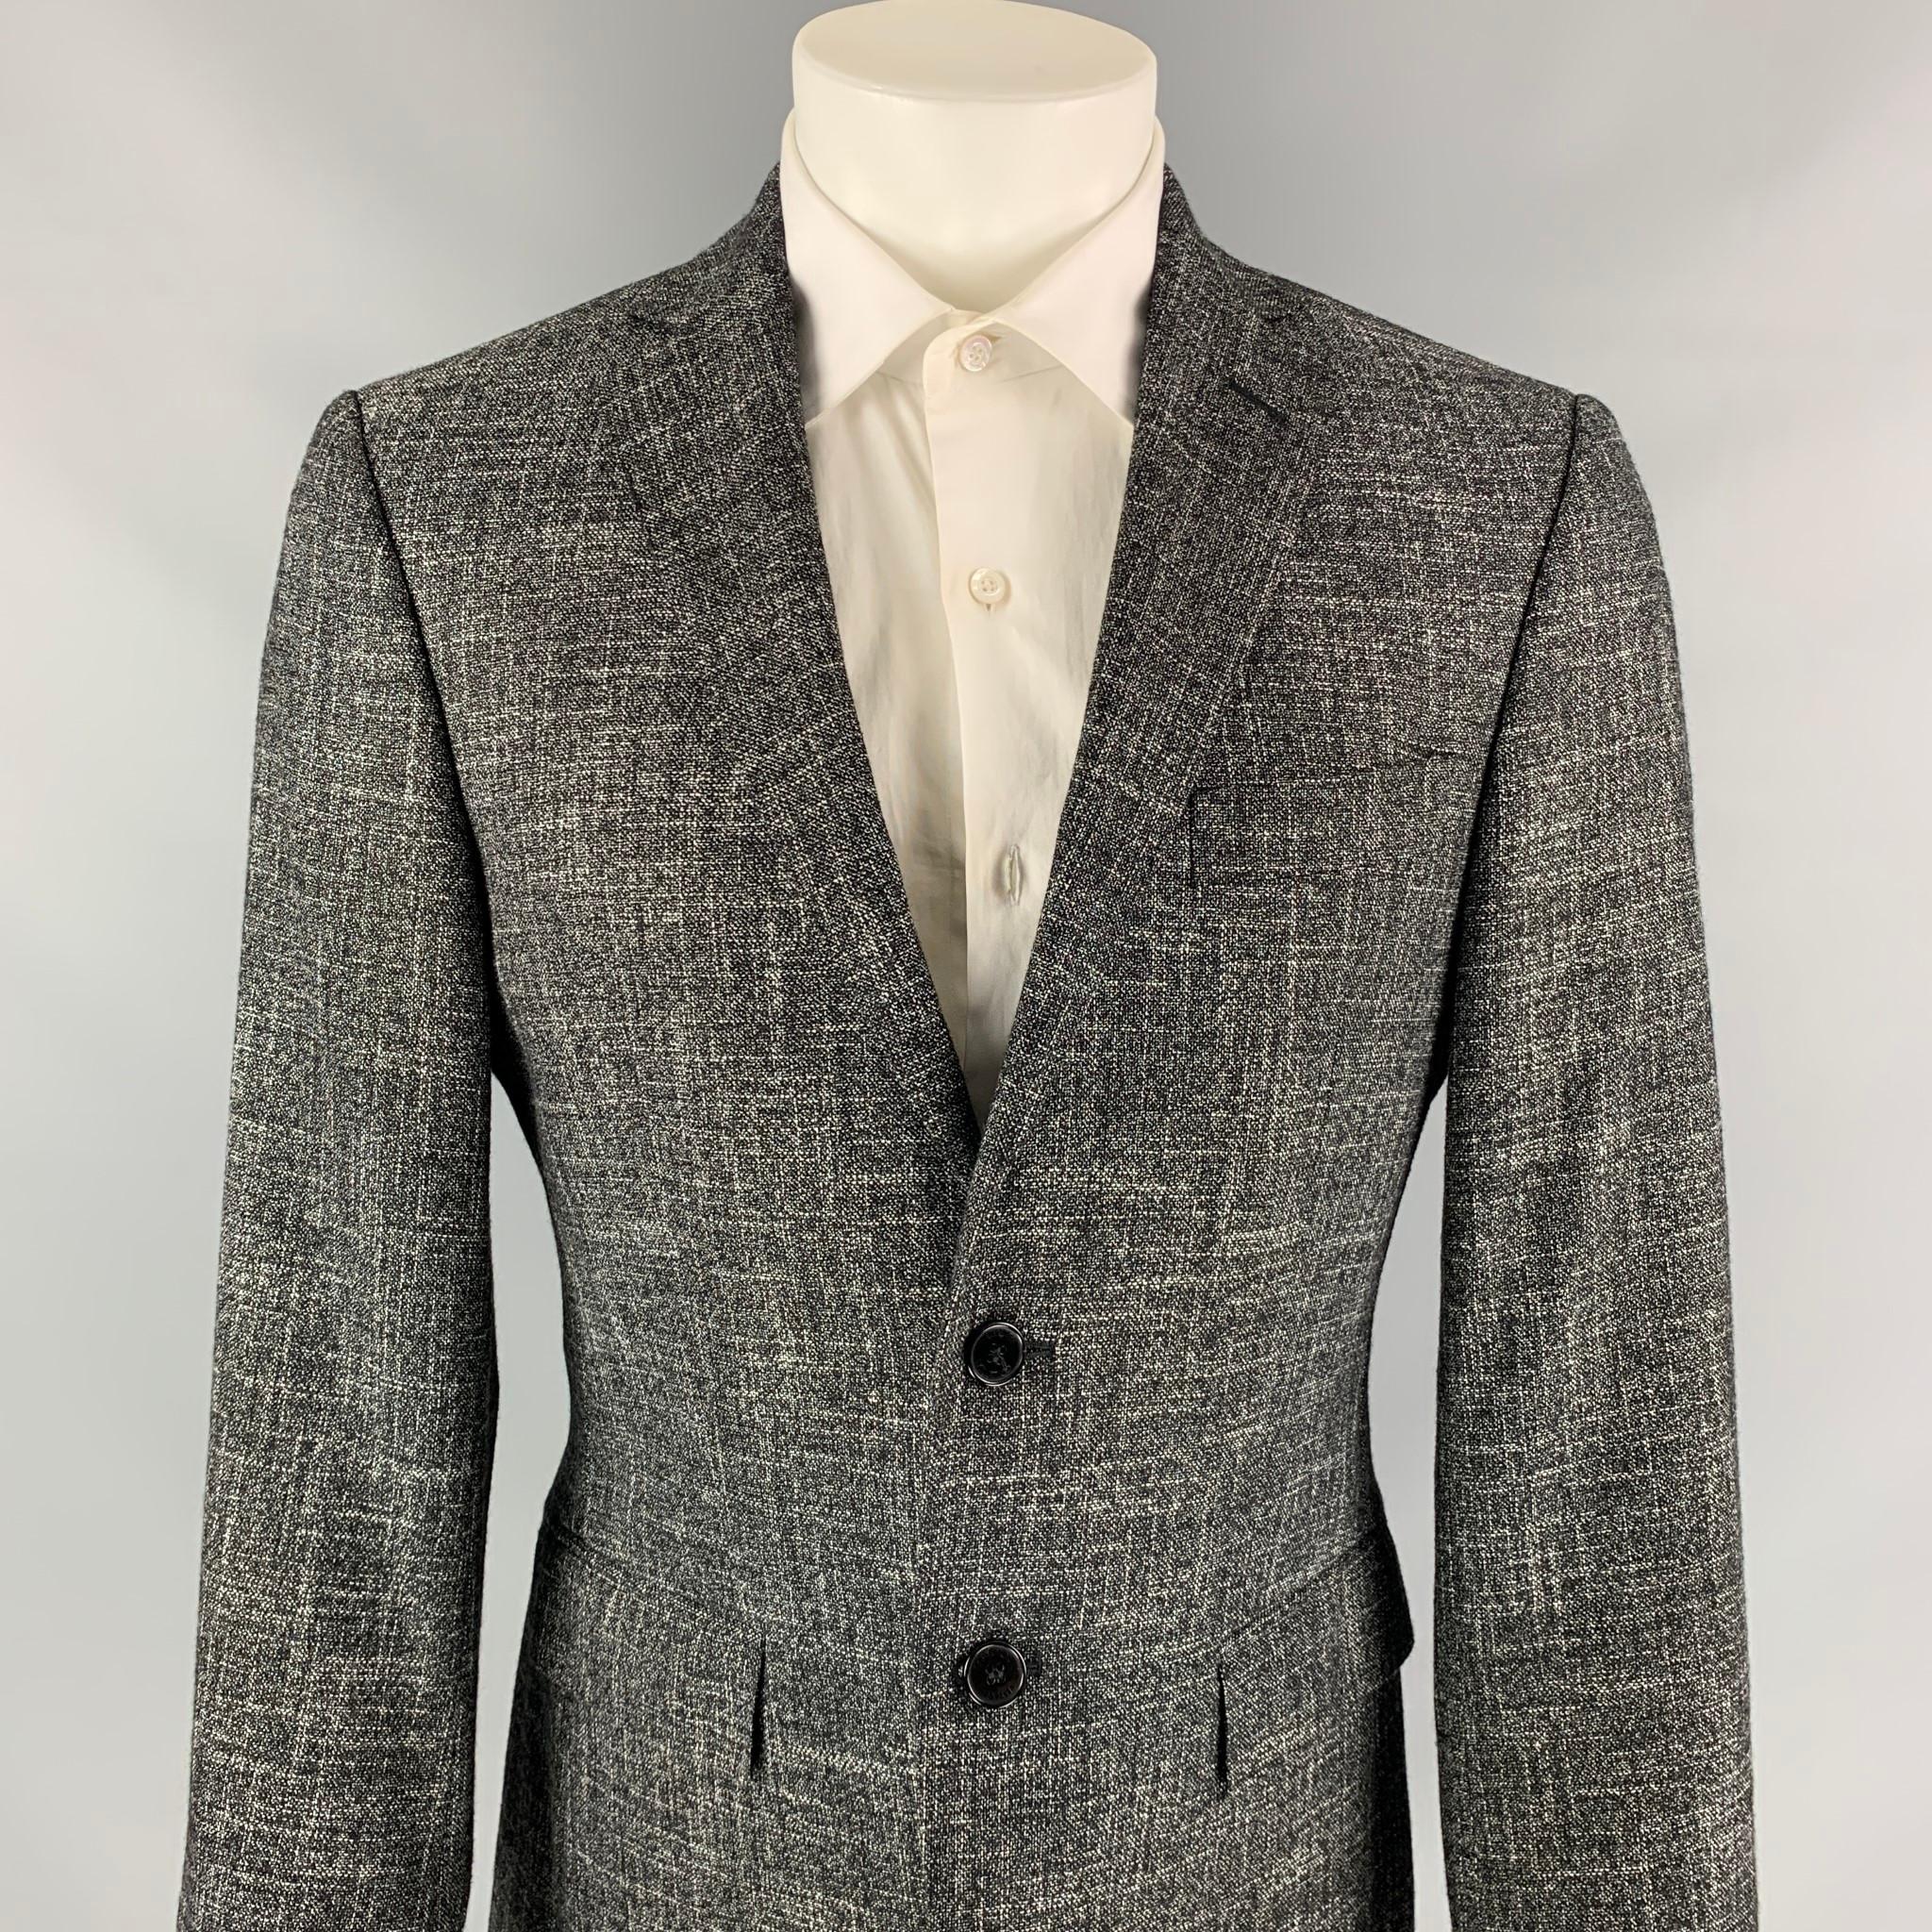 VERSACE COLLECTION sport coat comes in a dark gray & white heather wool blend with a full liner featuring a notch lapel, flap pockets, and a two button closure. 

Very Good Pre-Owned Condition.
Marked: 46

Measurements:

Shoulder: 17.5 in.
Chest: 40